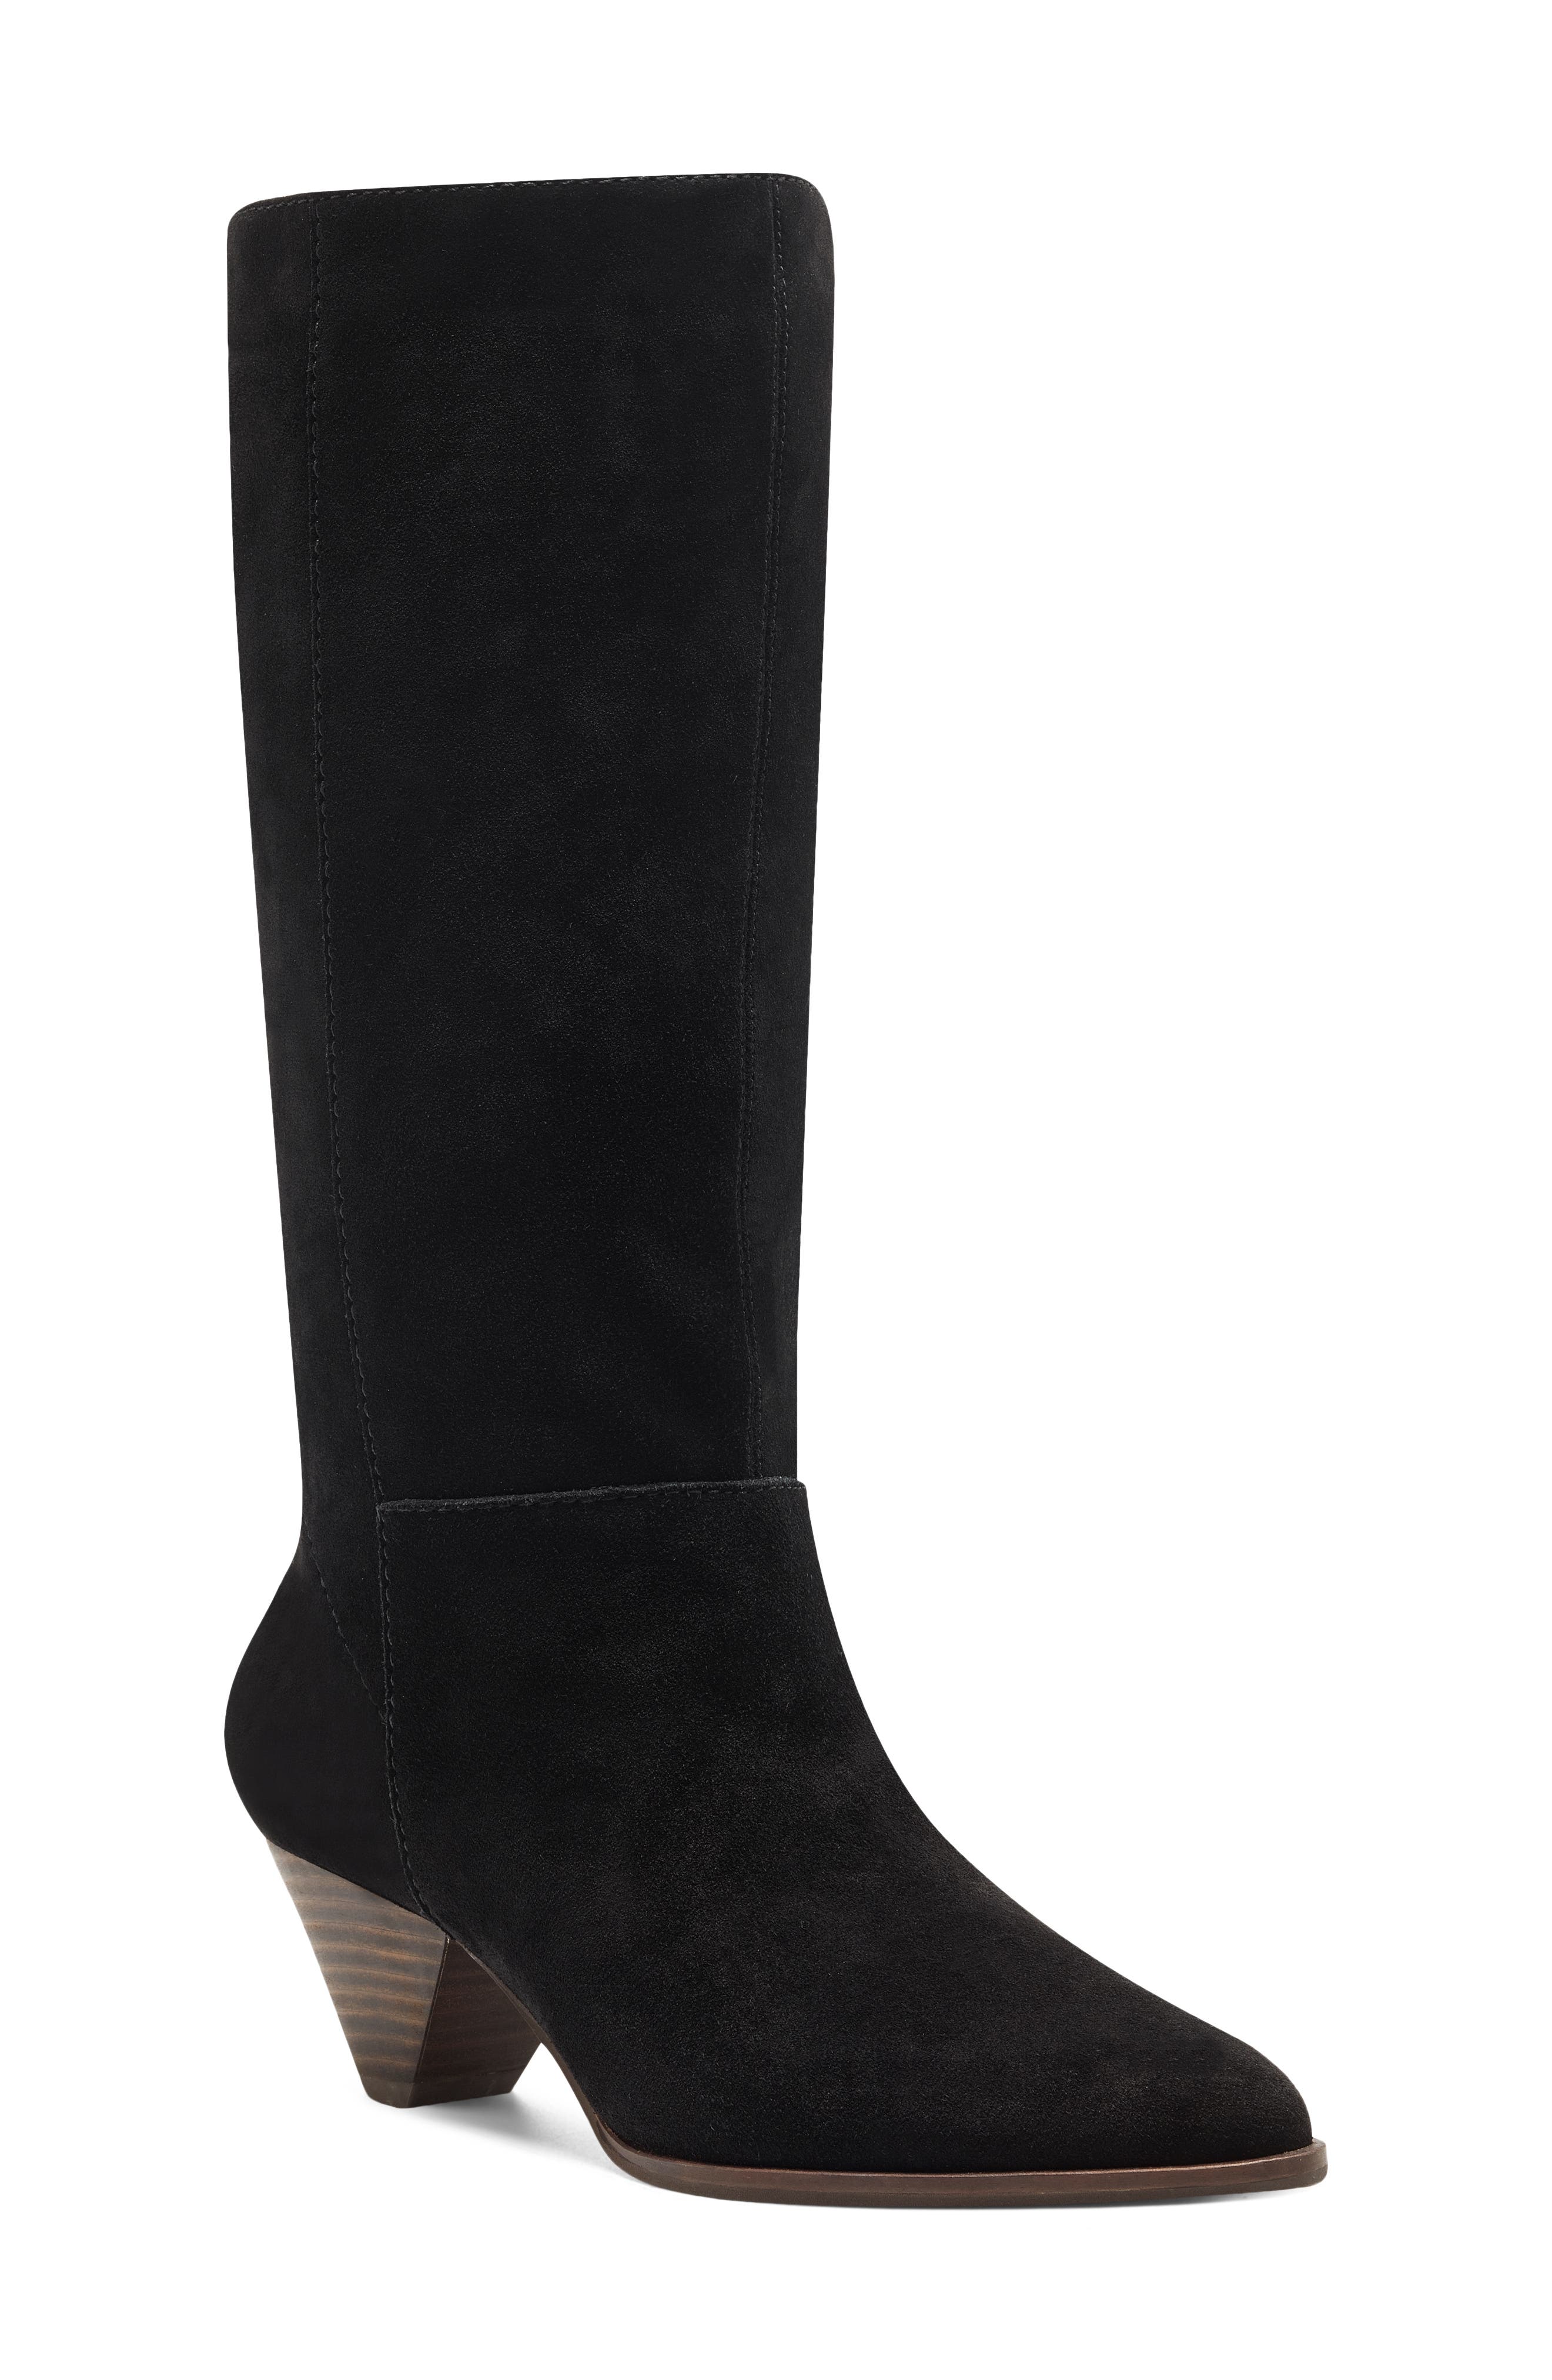 lucky brand black suede boots